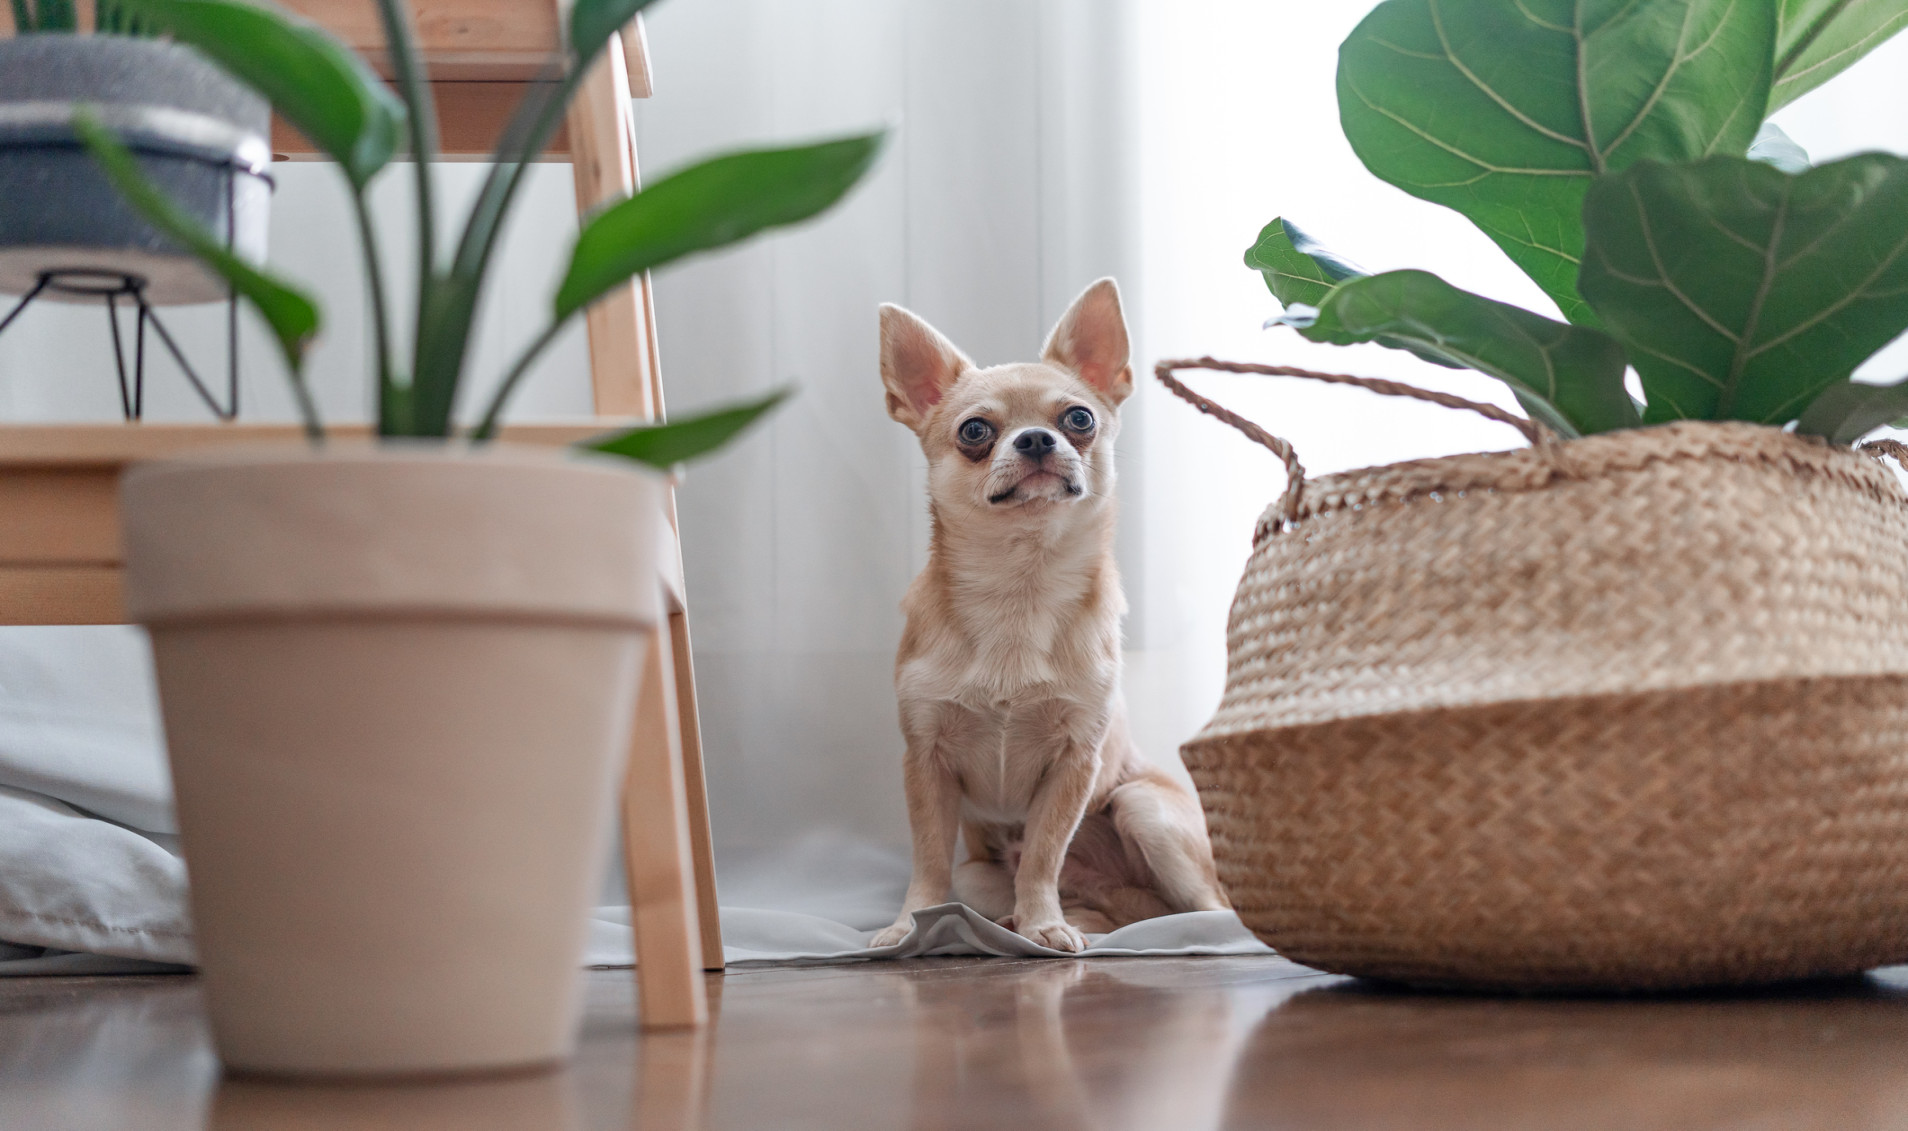 Pet-friendly House Plants That Are Safe for Furry Friends